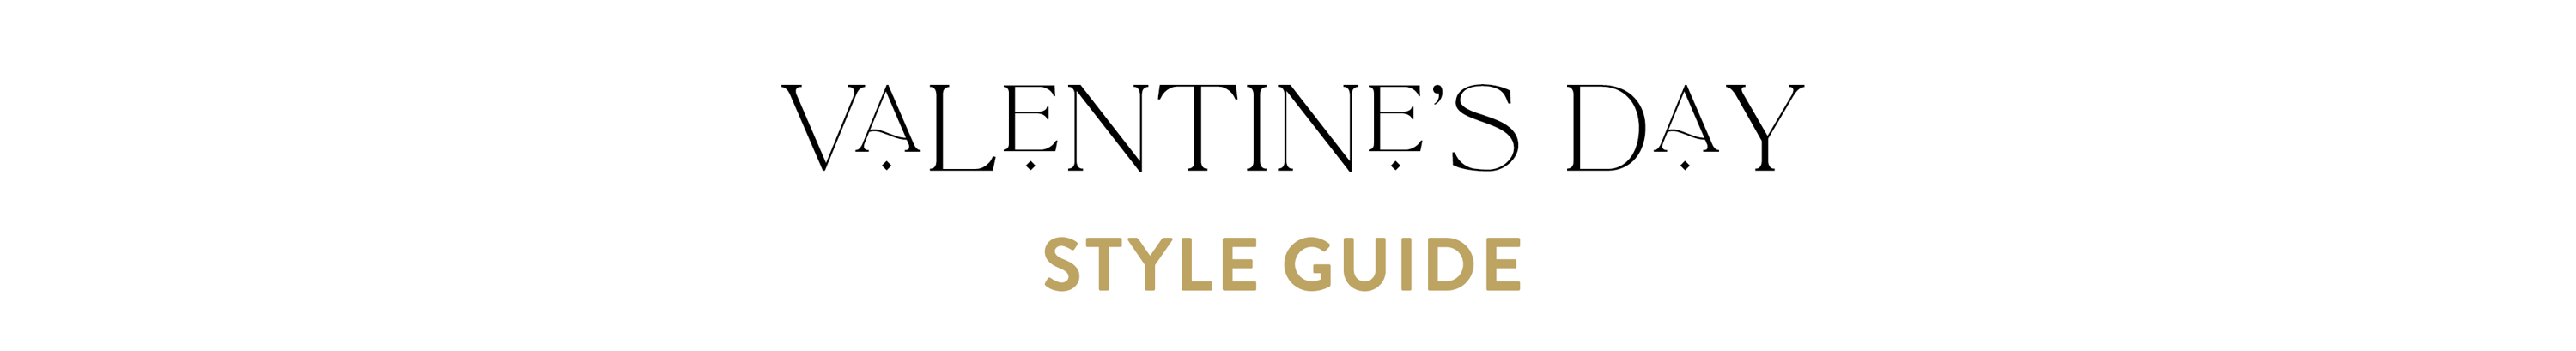 VALENTINES DAY STYLE GUIDE